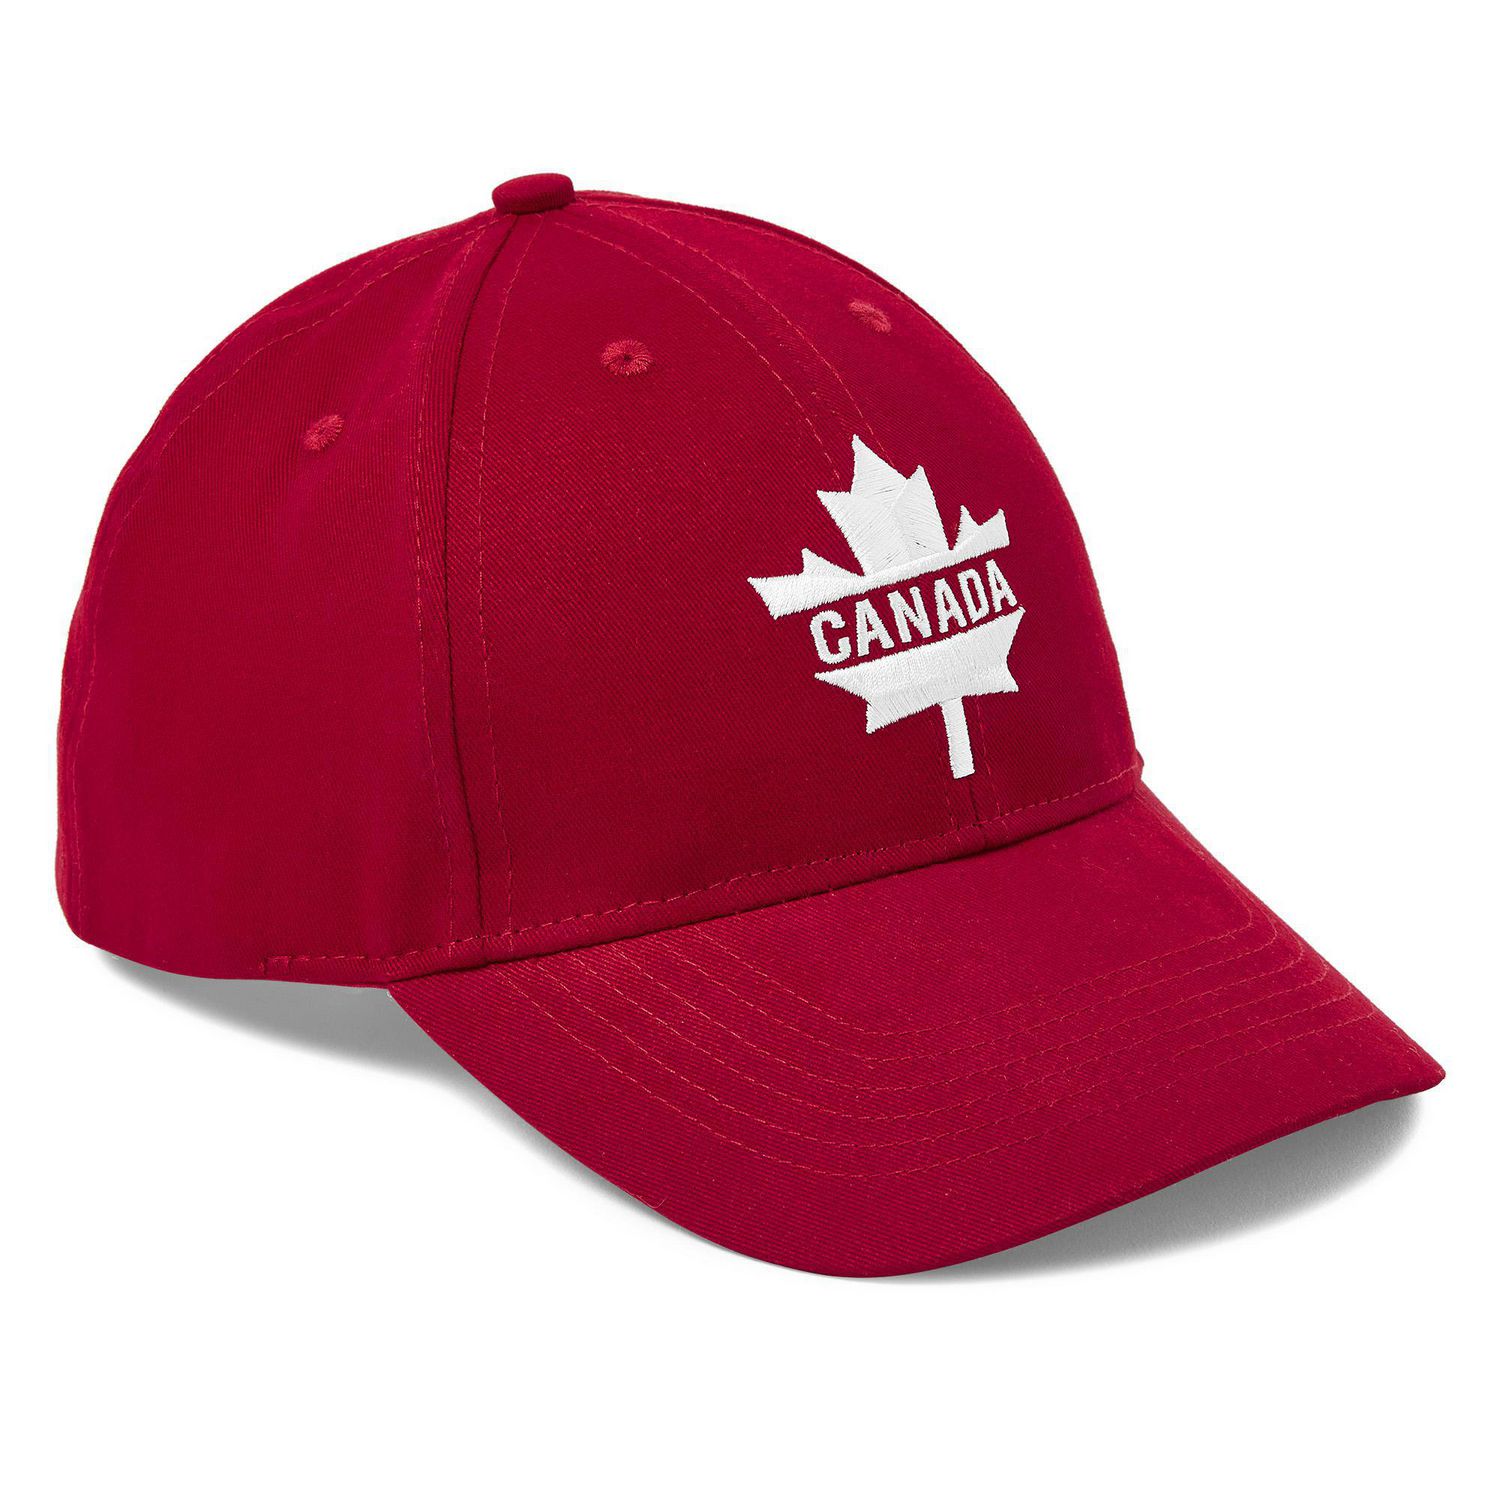 red maple leaf hat